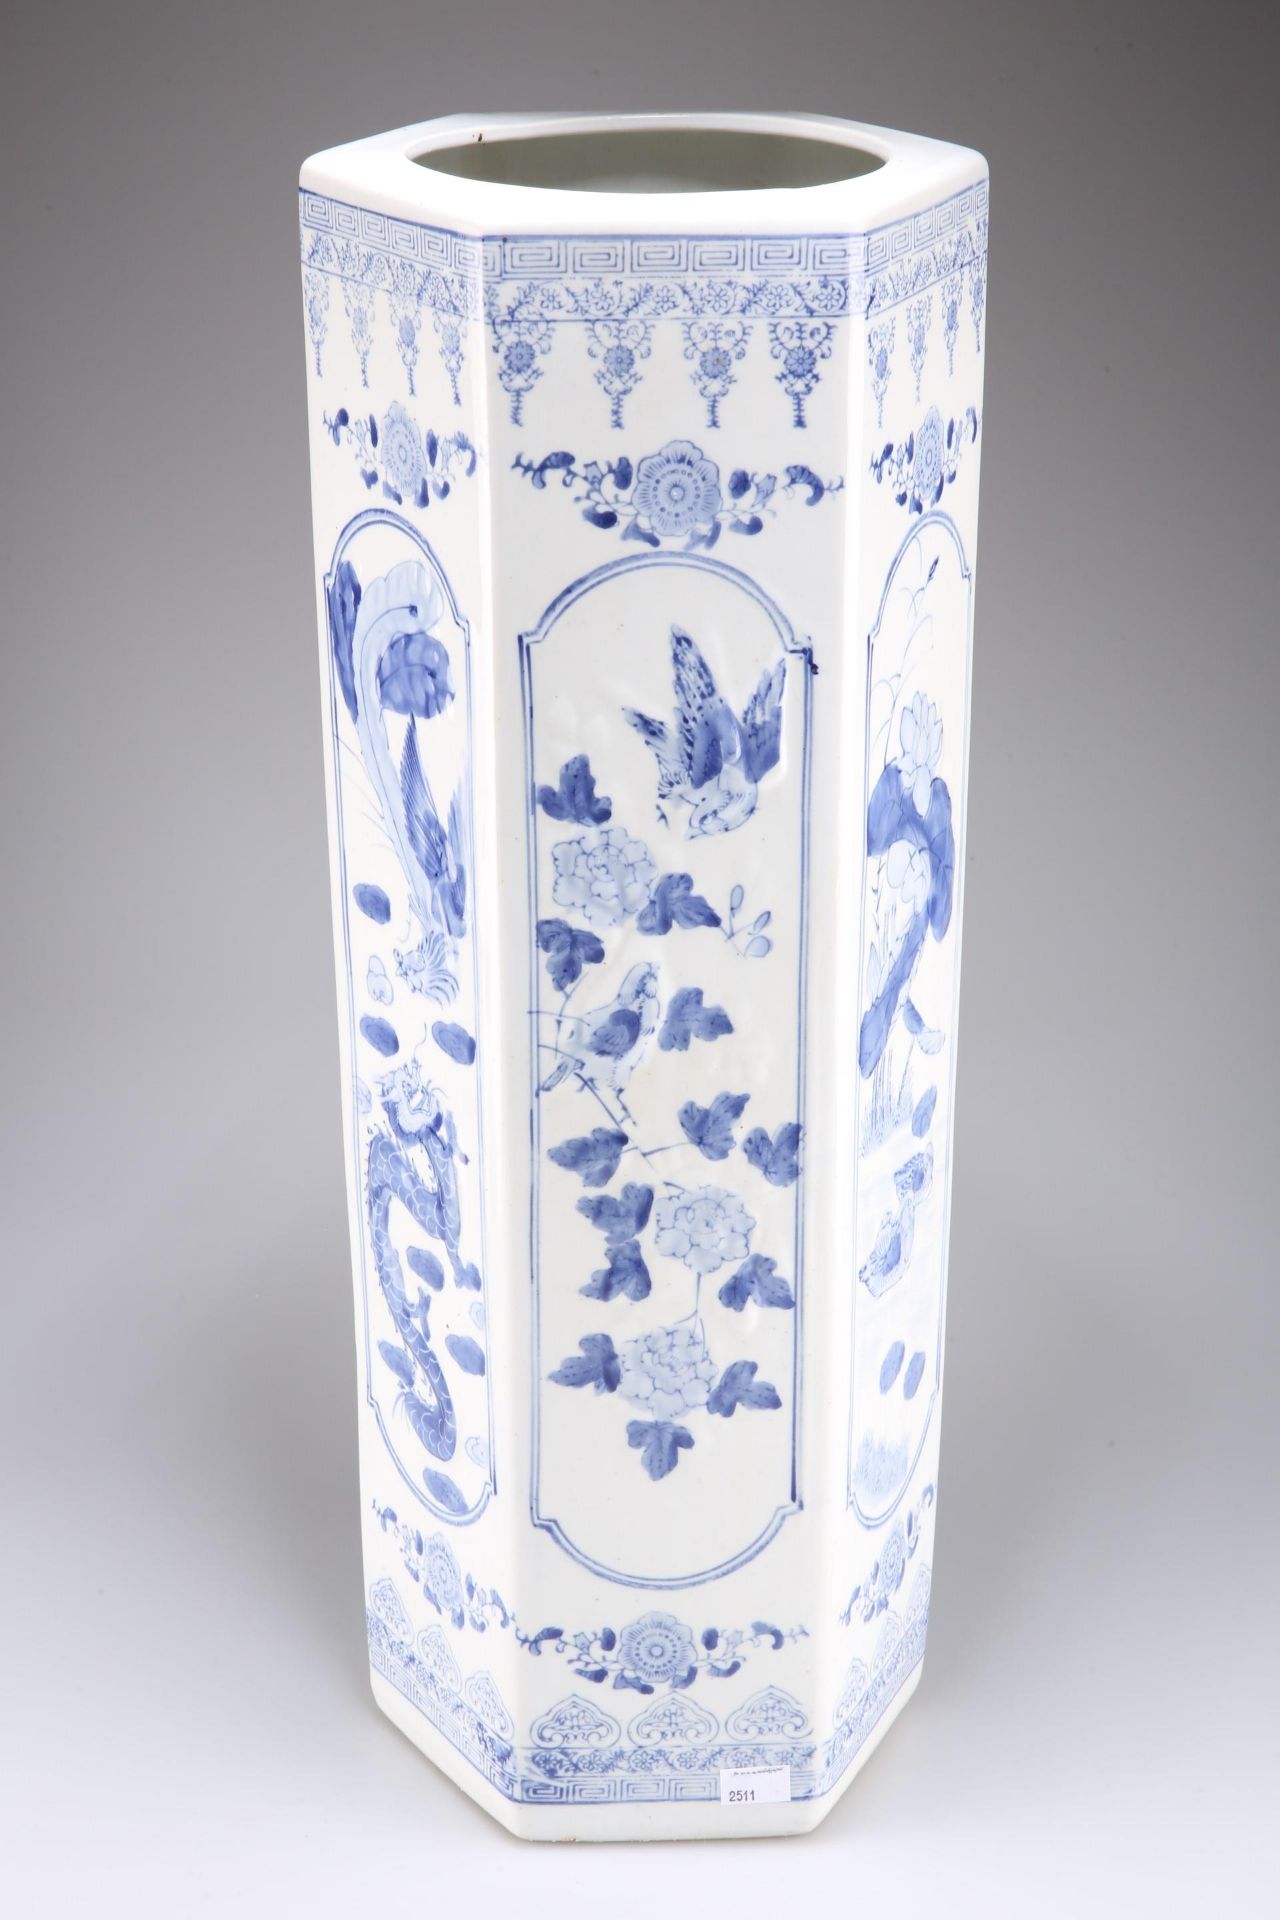 Oriental blue and white stickstand - Image 4 of 7